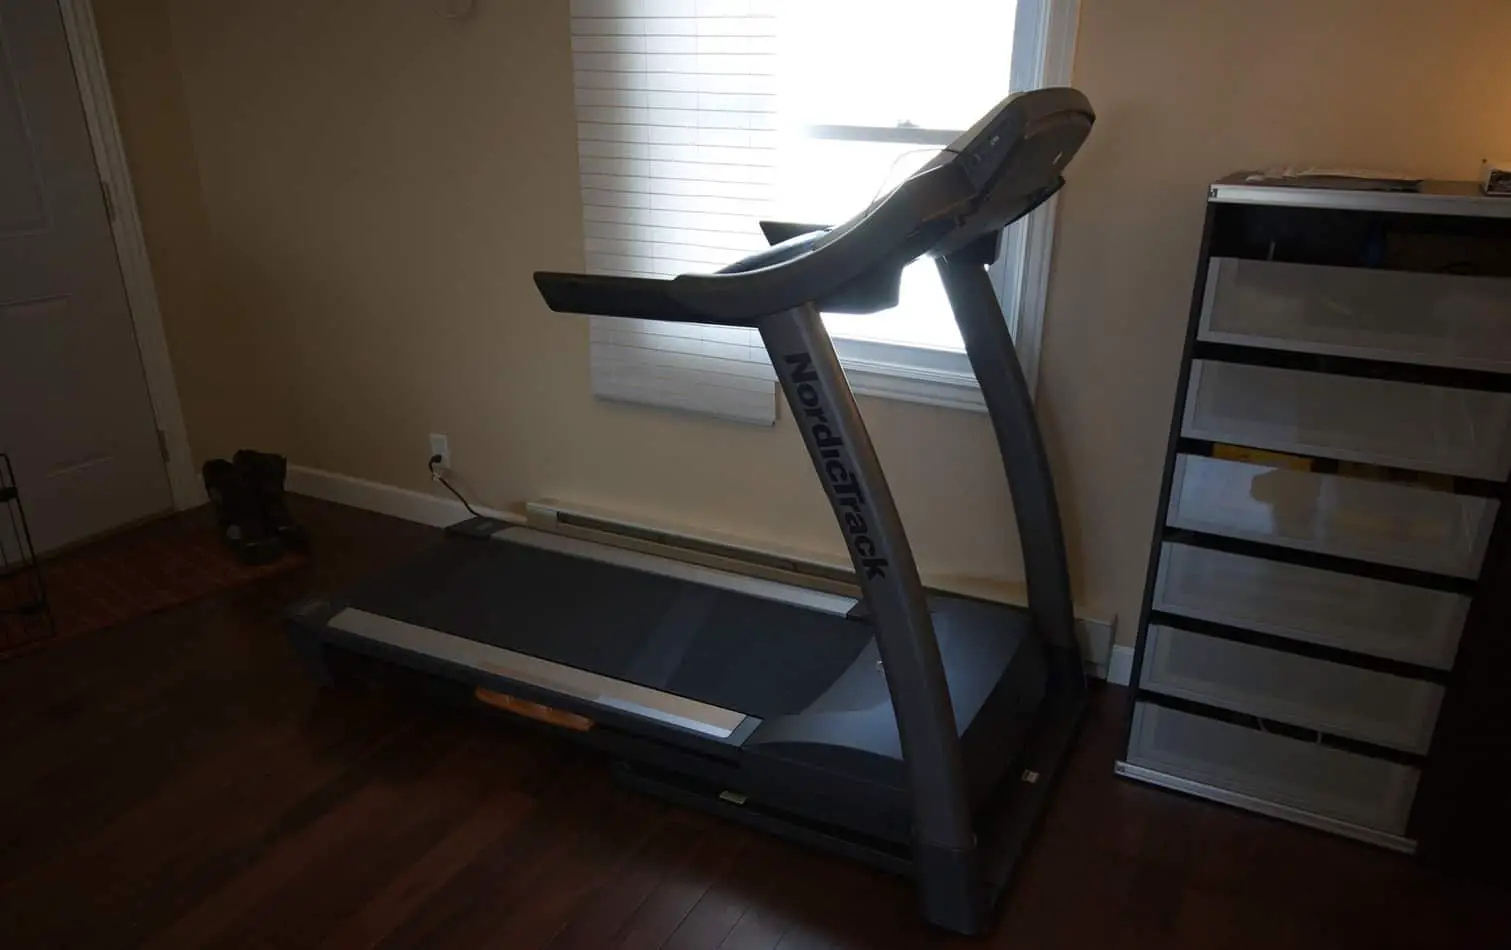 how to make a treadmill quieter